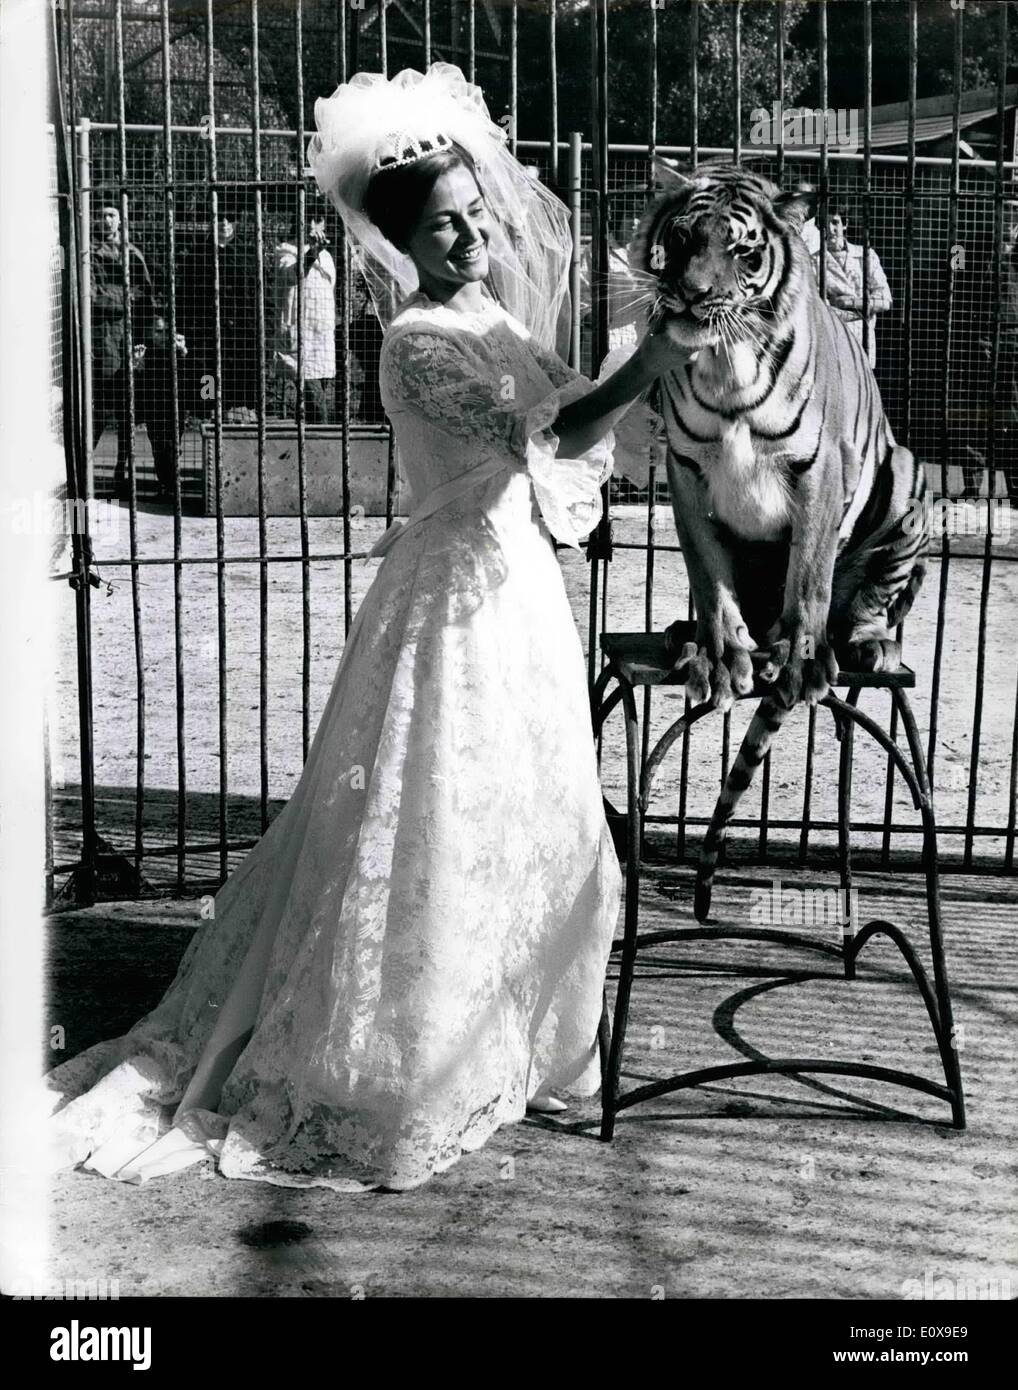 Oct. 10, 1965 - The bride who keeps a tiges as a pet.: A bride stepped into a tiger's cage yesterday and was quickly followed by a bridesmaid. The bridesmaid was afraid that the bride's wedding gown might drag on the floor of the cage. But there were also fears that the billowing bridal veil worn by Mary Chipperfield, 27-year old member of the famous circus family, might upset her pet tiger. So the bride's father Mr. James Chipperfield, and her uncle, Mr. Richard Chipperfield, also entered the cage to look after Mary and her sister Margaret, the bridesmaid Stock Photo